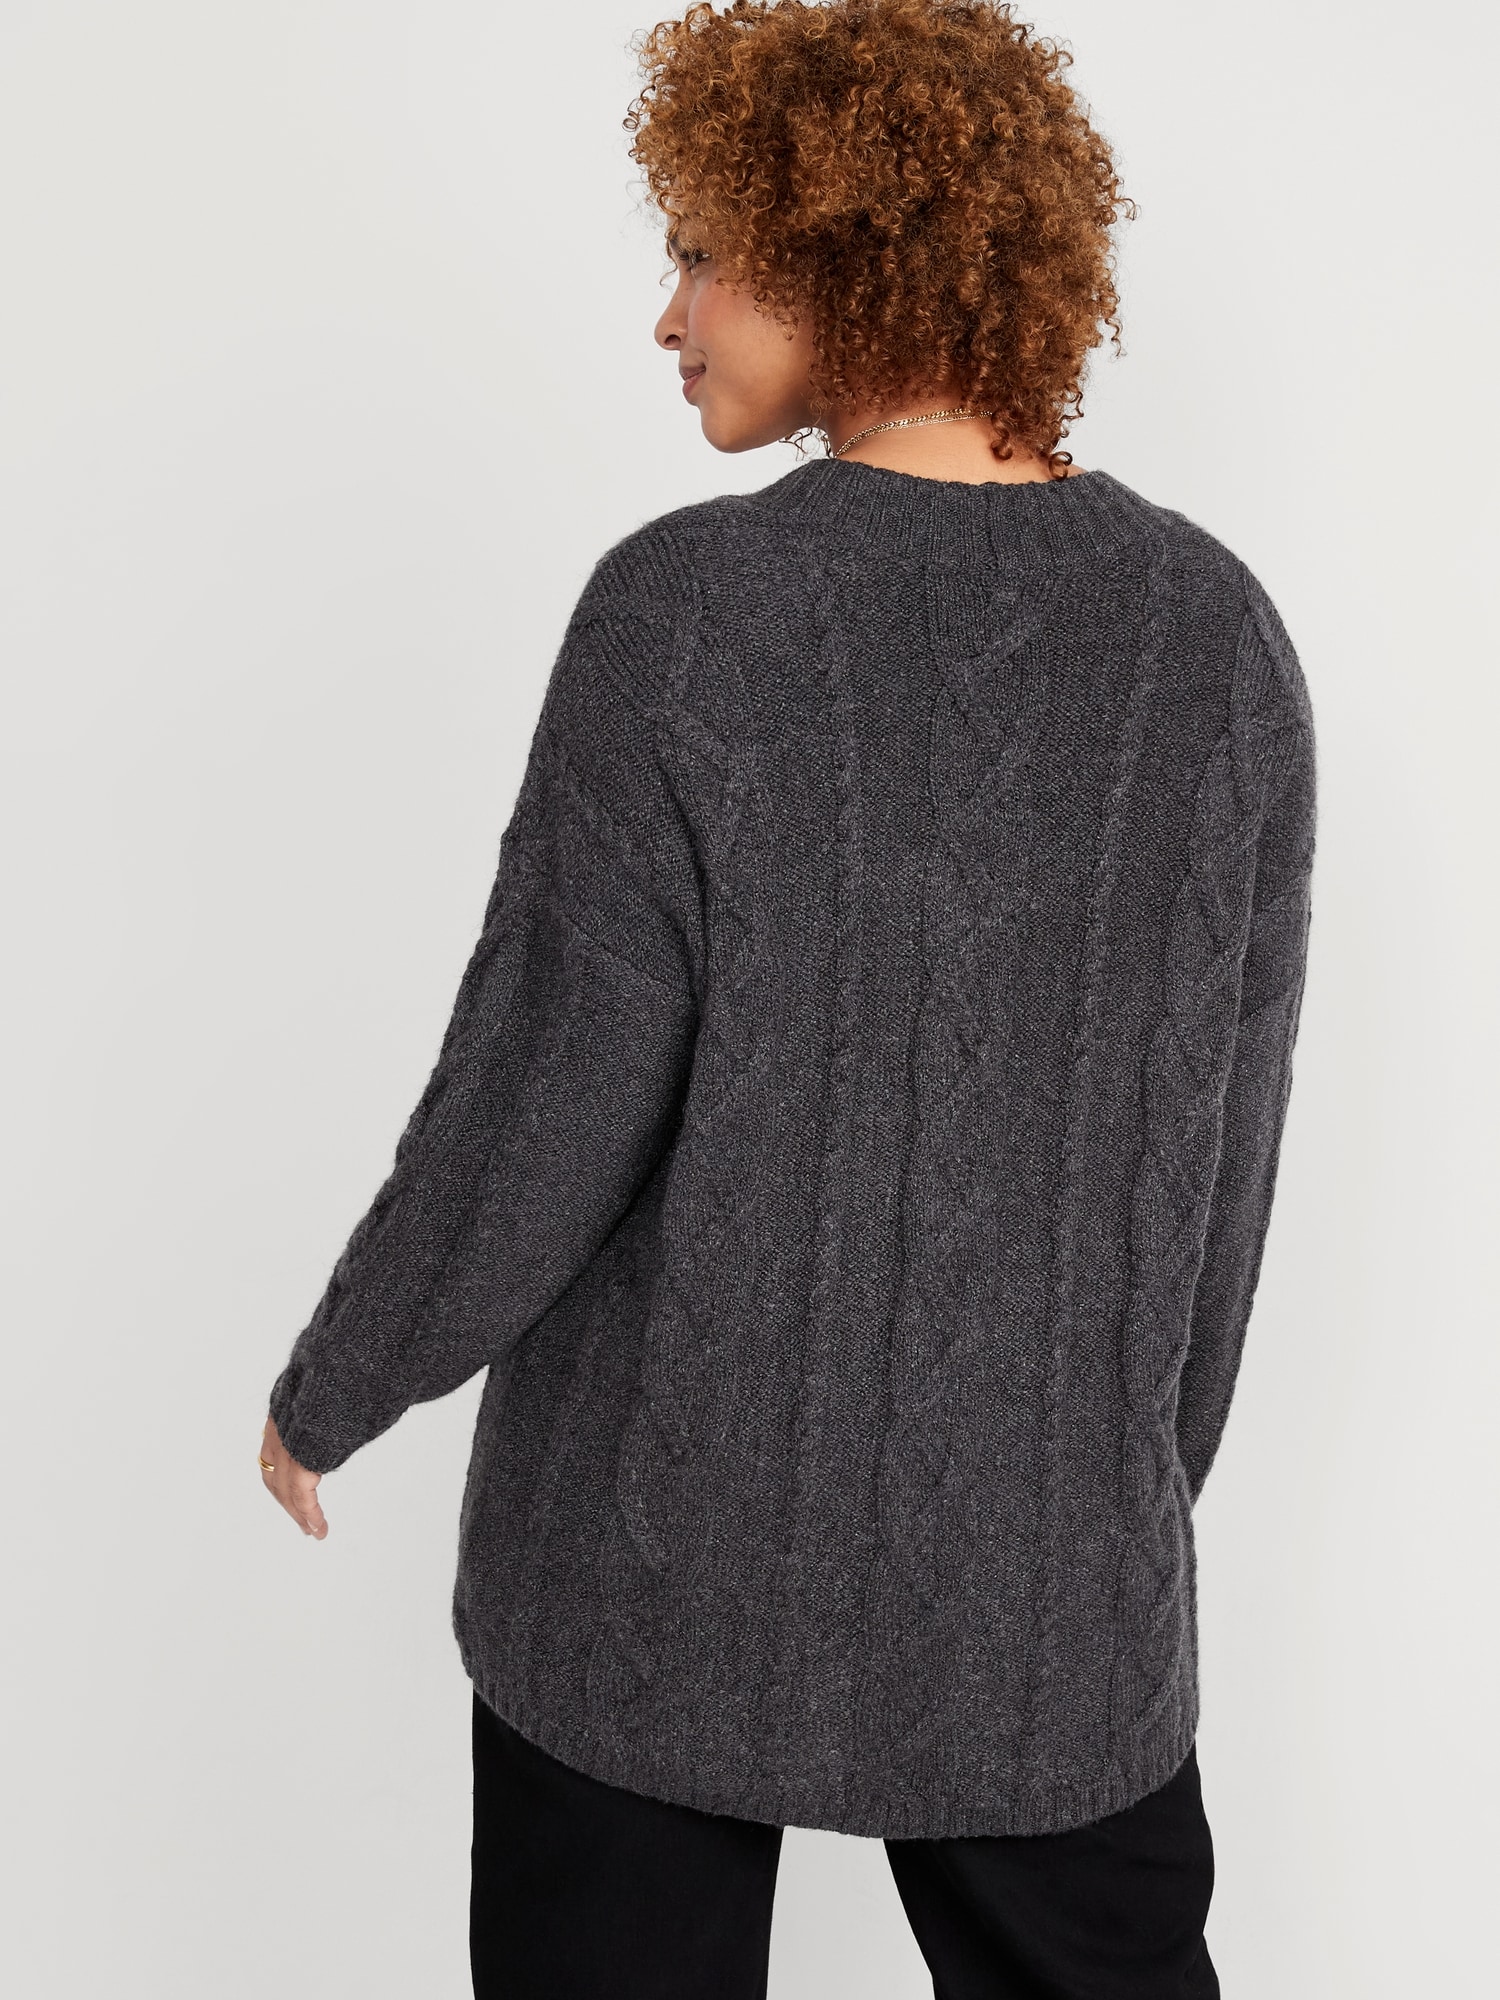 Oversized Chunky Cable-Knit Women for Cardigan Sweater Old Navy 